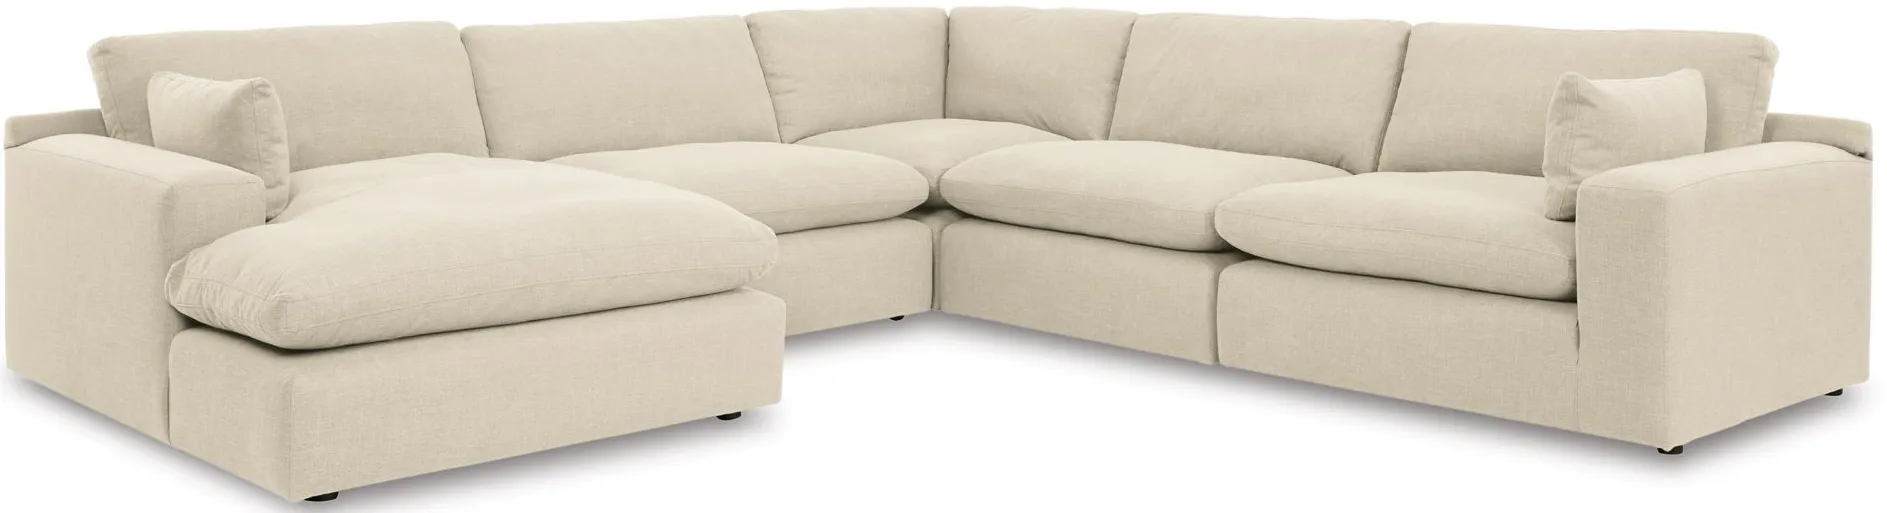 Elyza 5-pc. Sectional with Chaise in Linen by Ashley Furniture